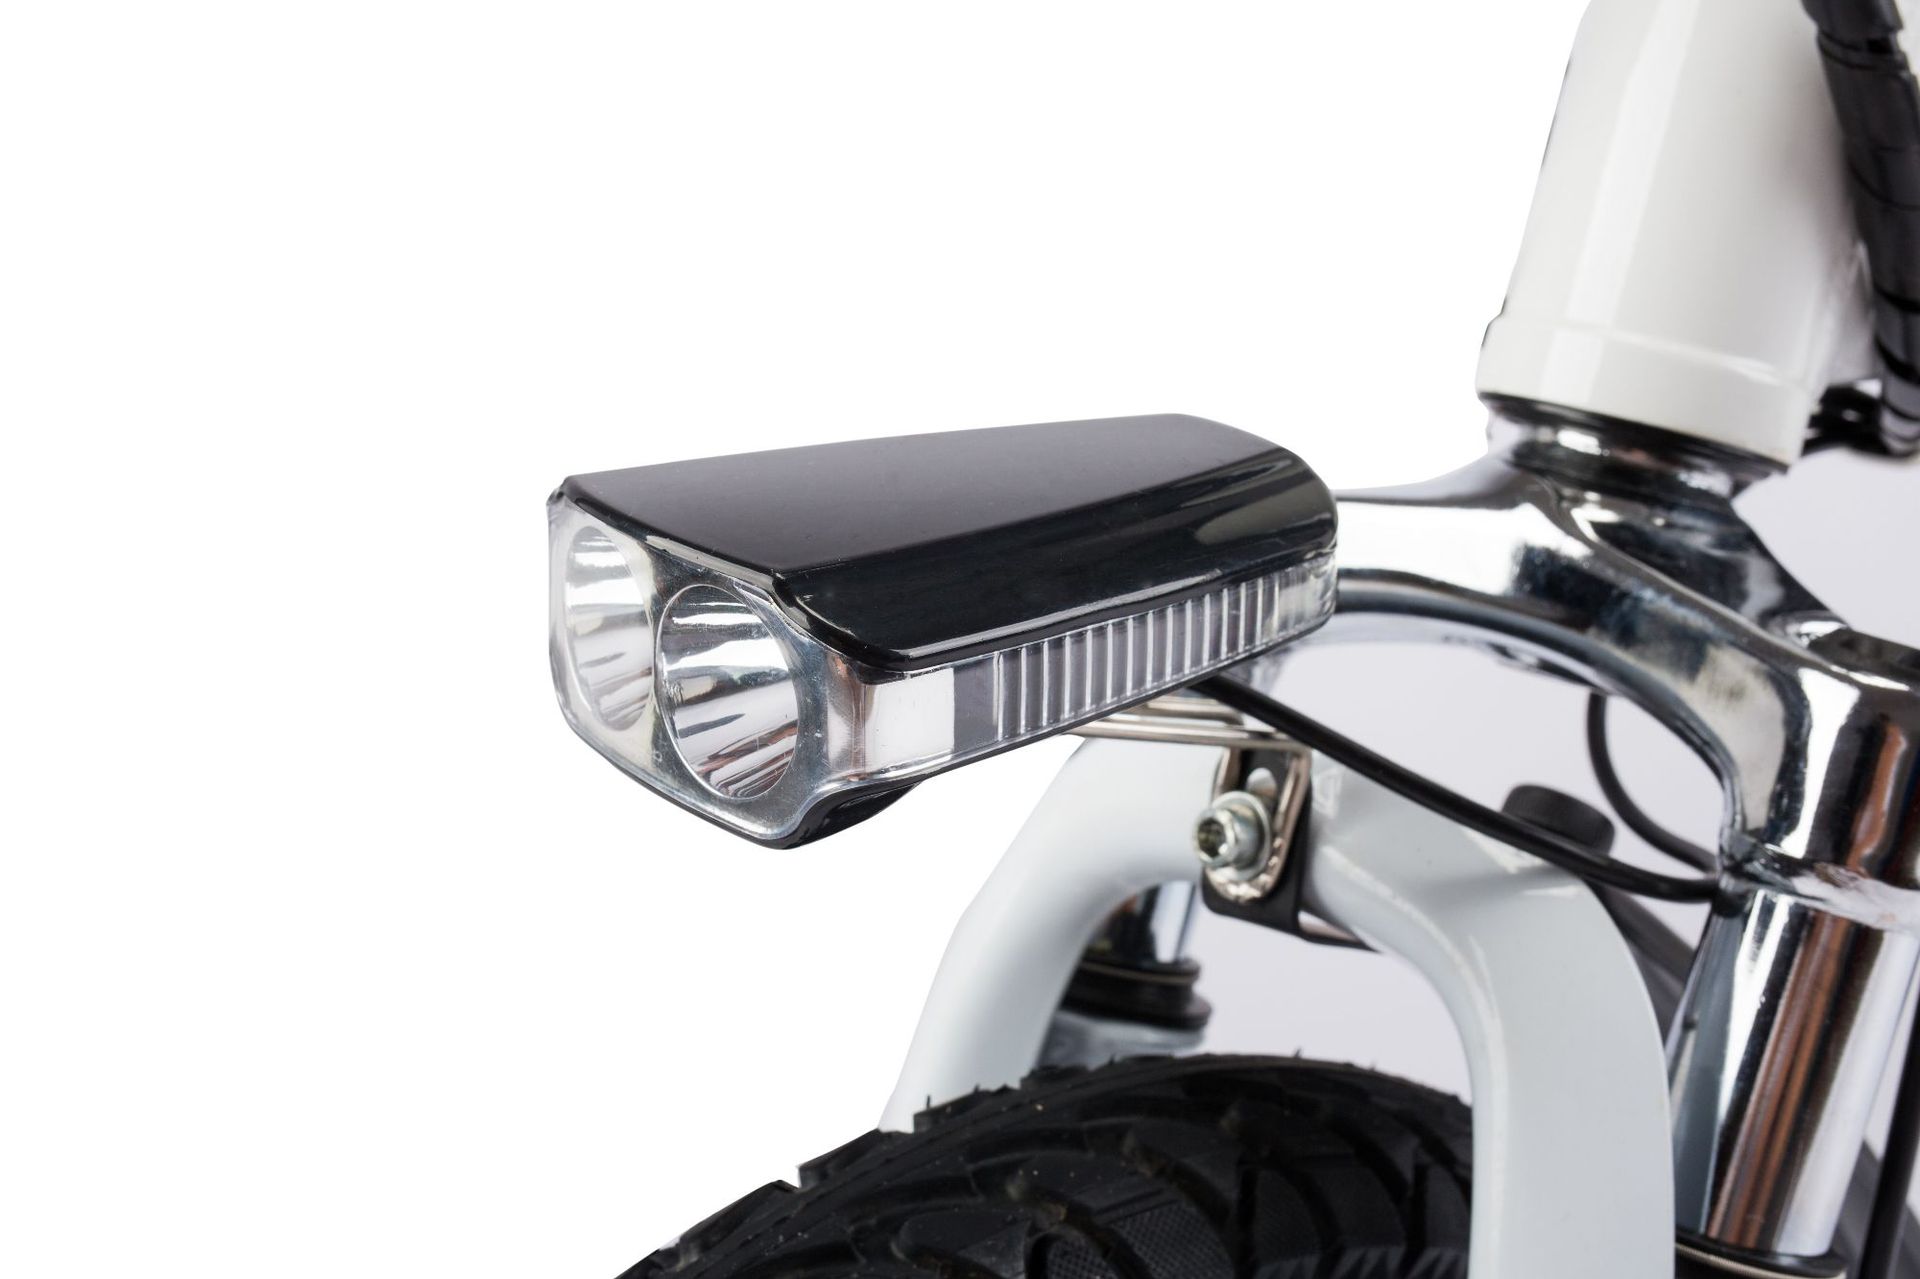 2022 Adult White Black Electric Bicycle Foldable 20 Inch